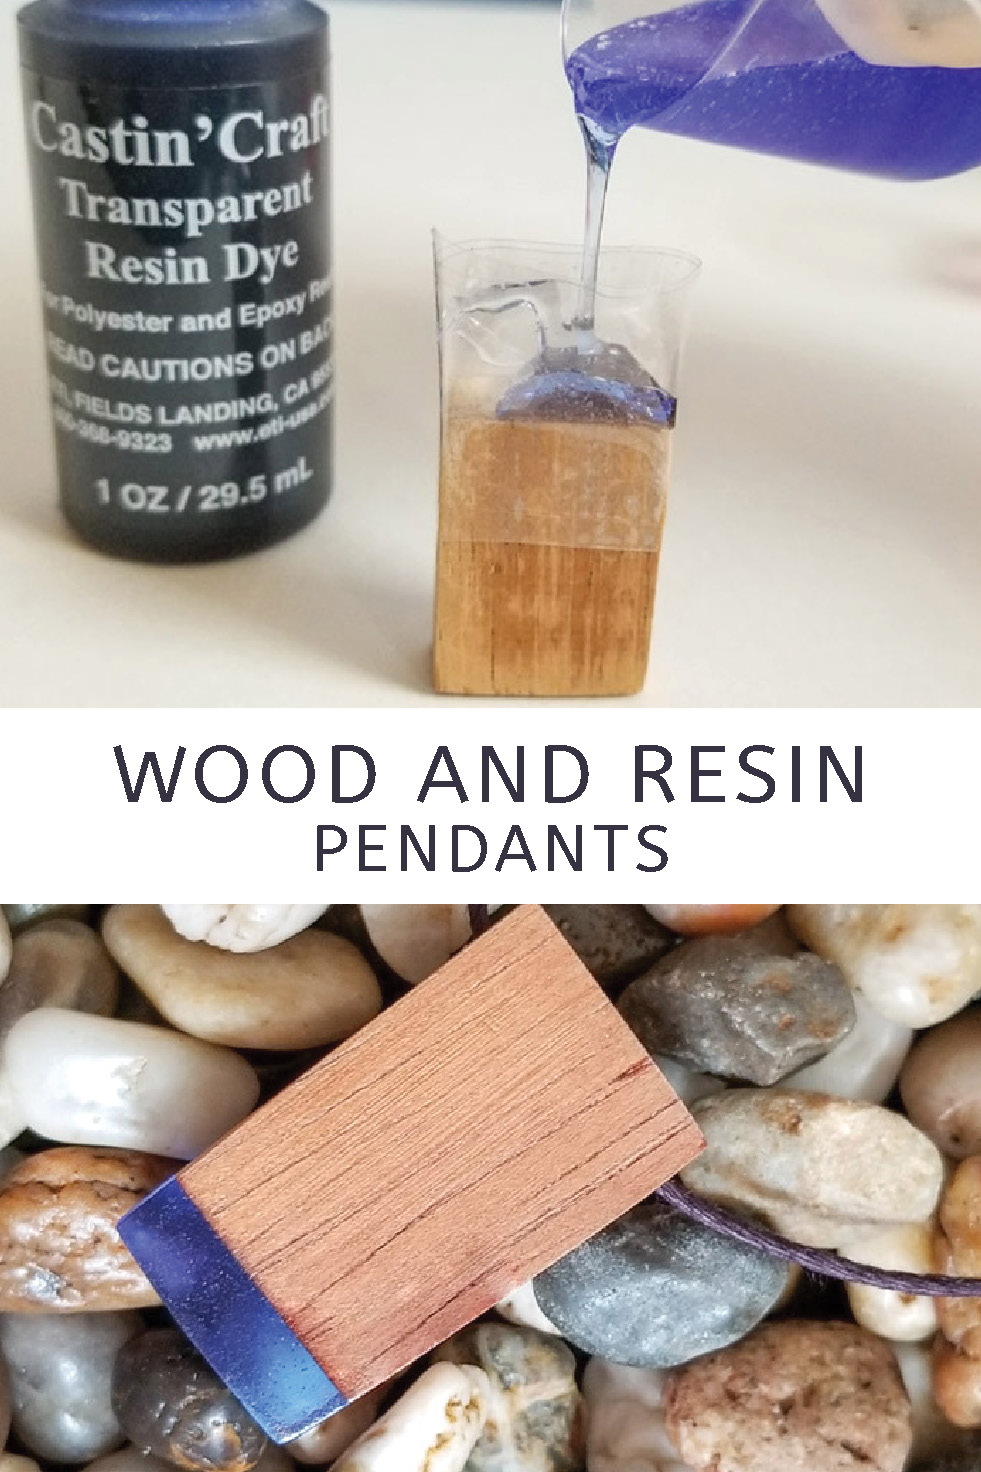 Try combining resin with natural wood for necklaces via @resincraftsblog